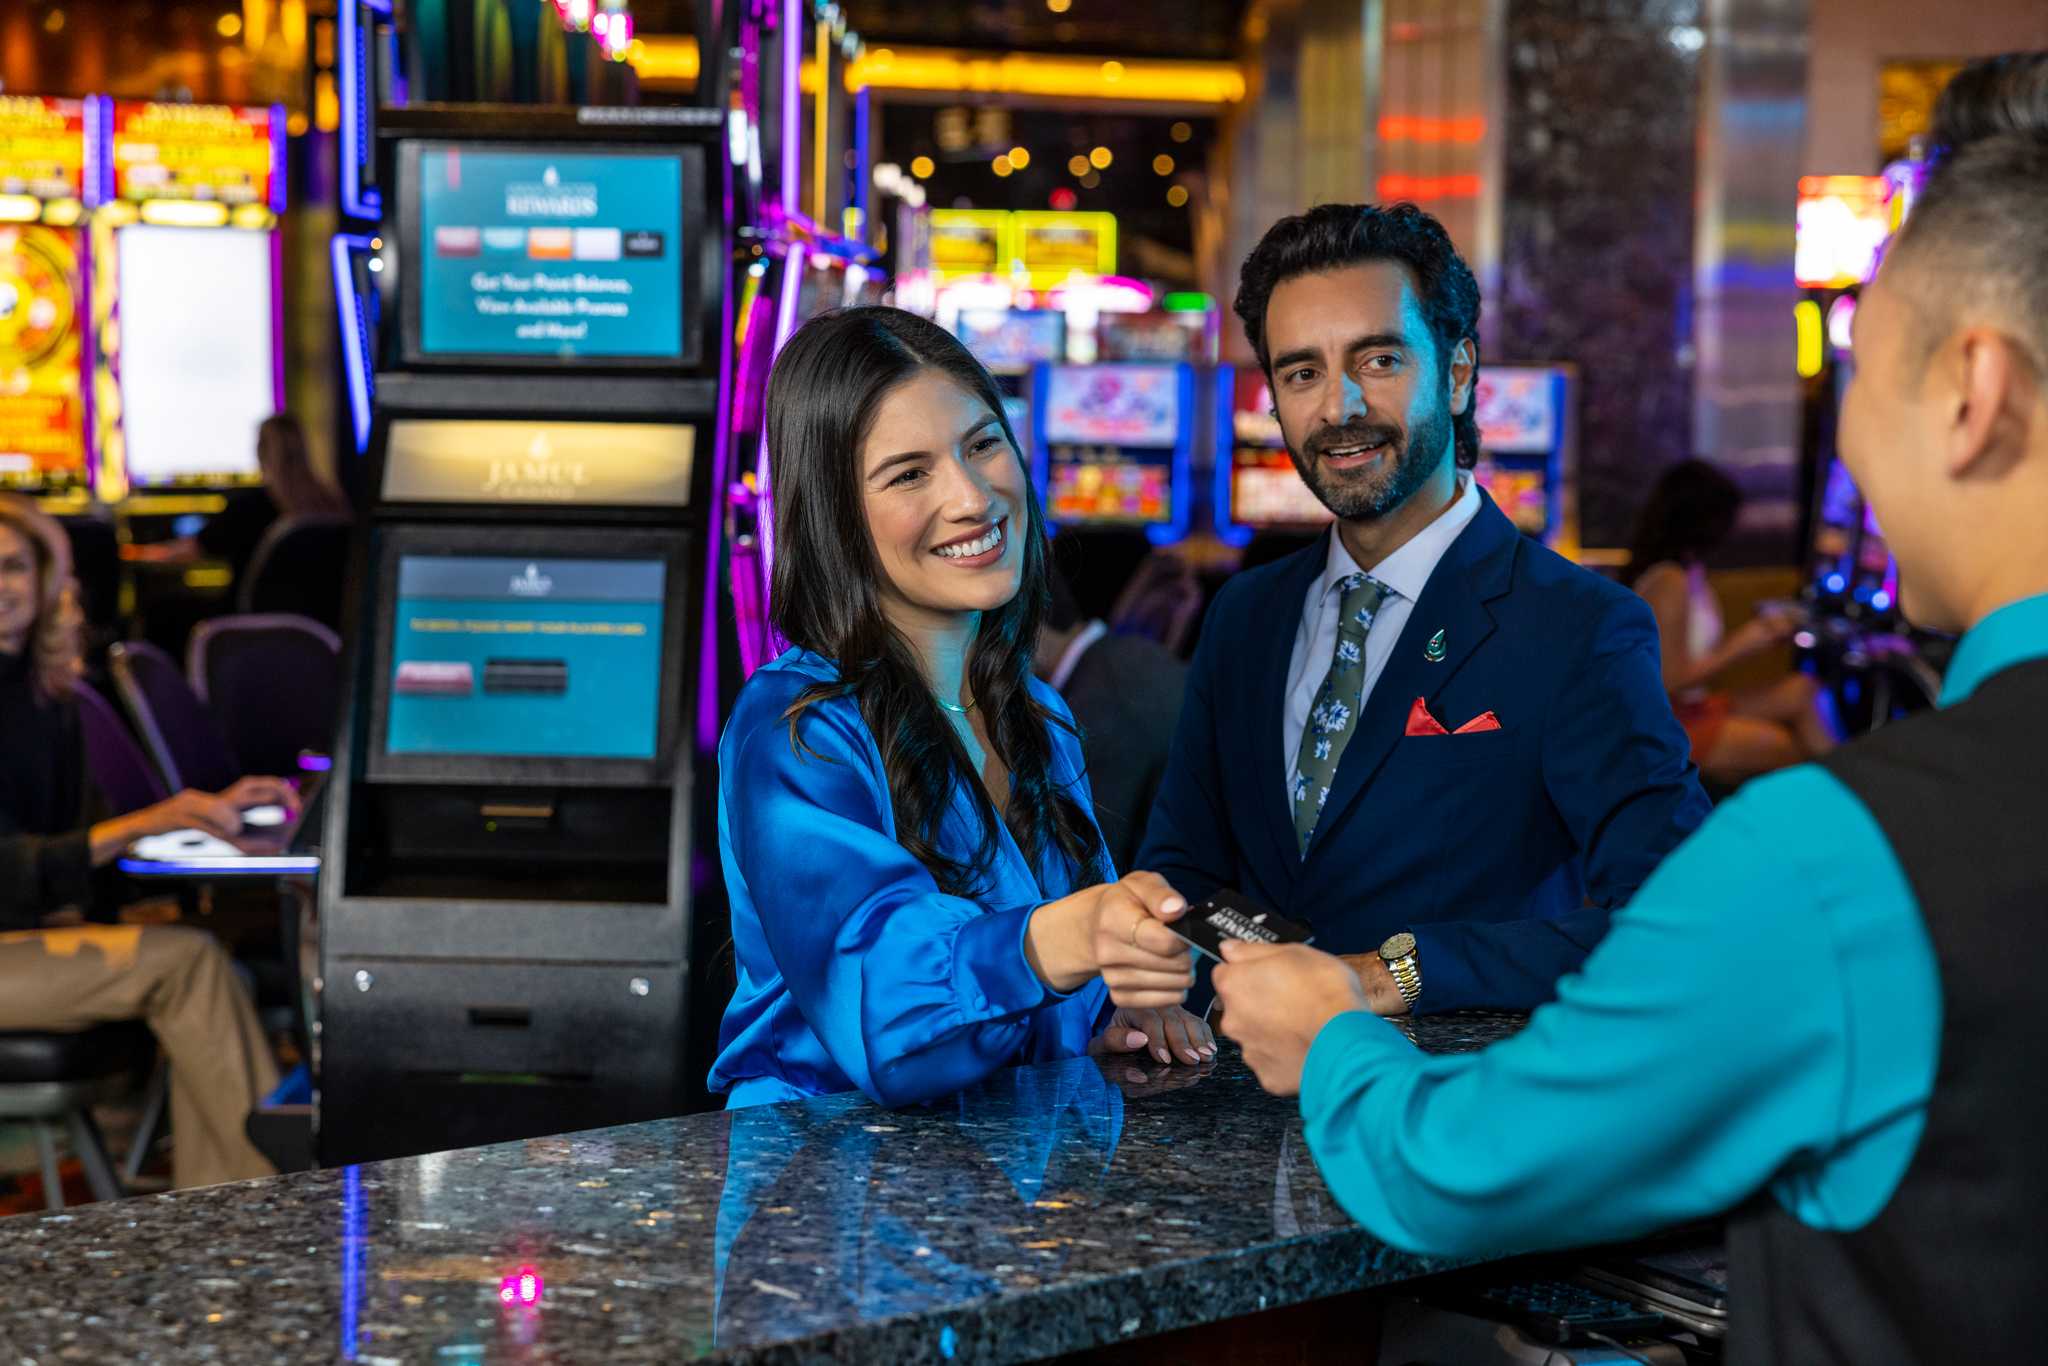 Jamul Casino's Players Club offering exclusive benefits, rewards, and personalized service to enhance the gaming experience for valued members.